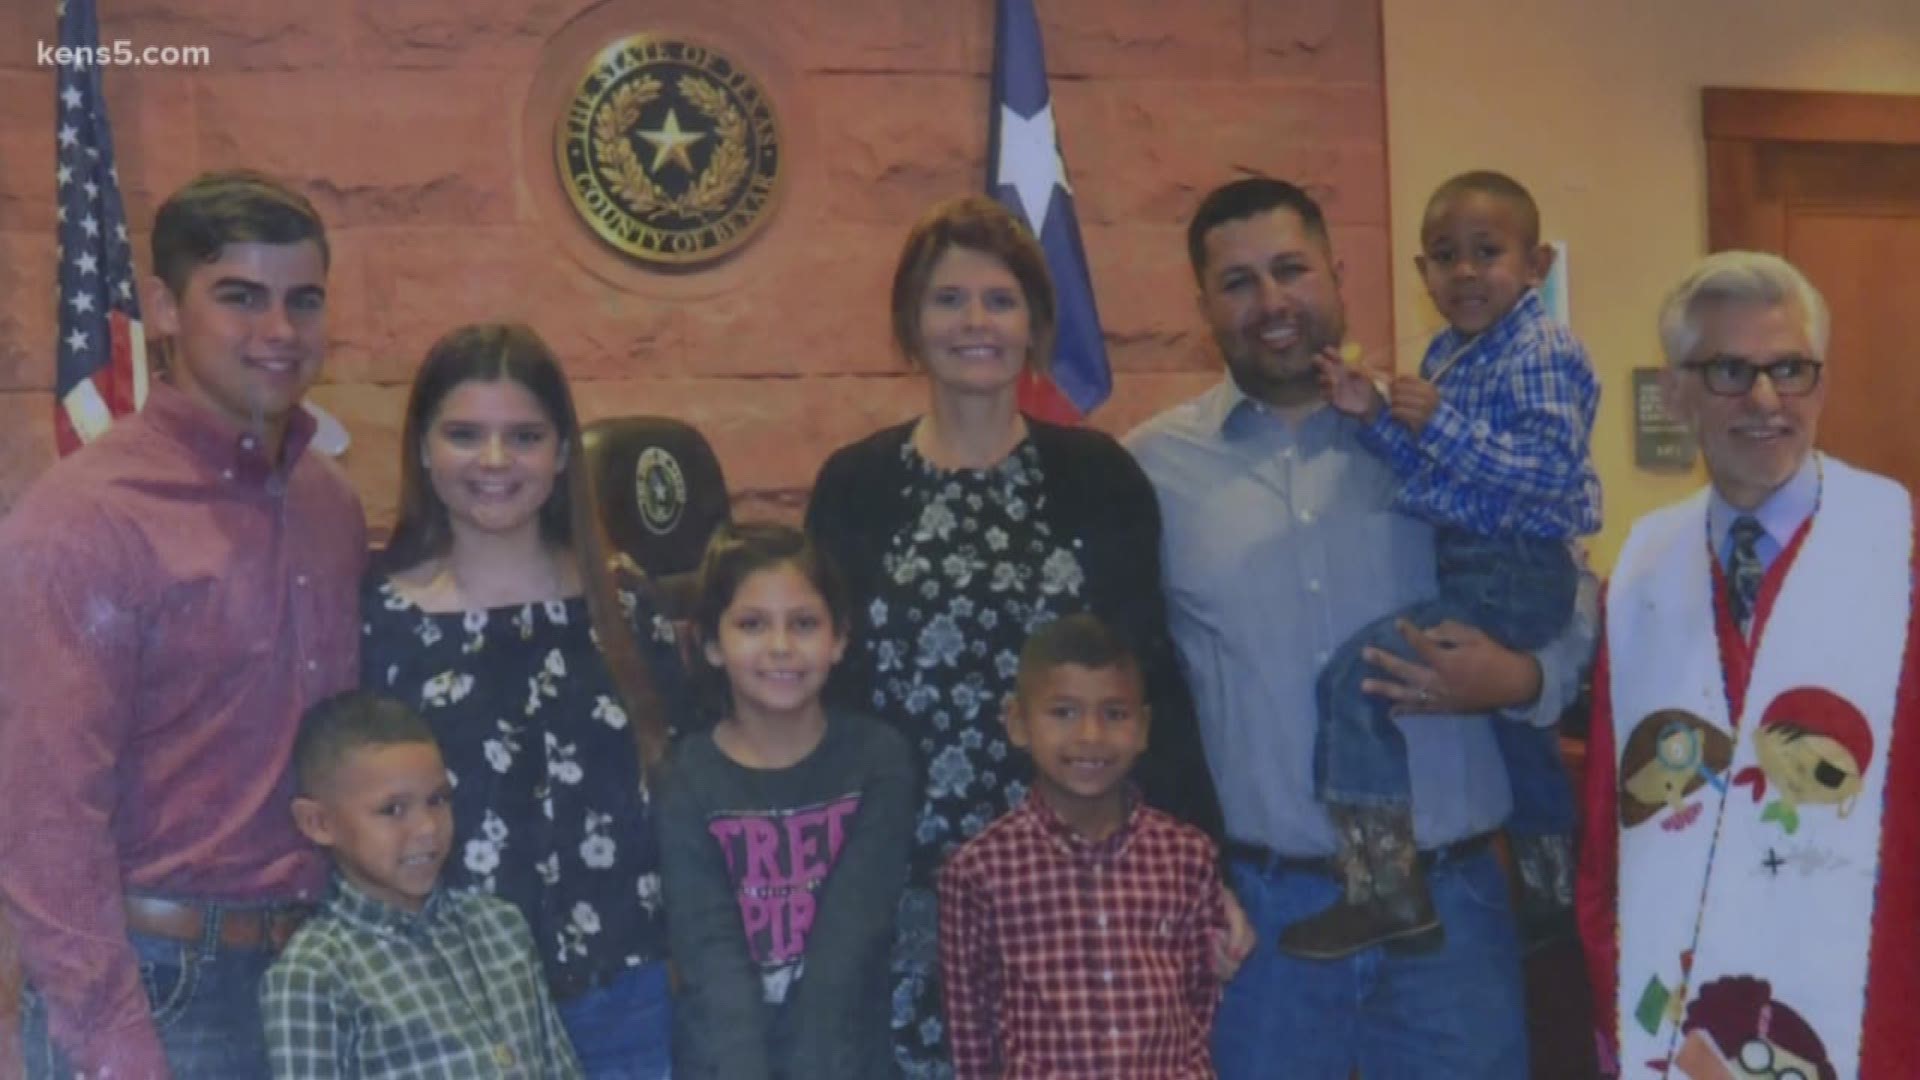 The Cantu family out of Lytle originally fostered one child, then ended up adopting him, and then adopted his brothers.